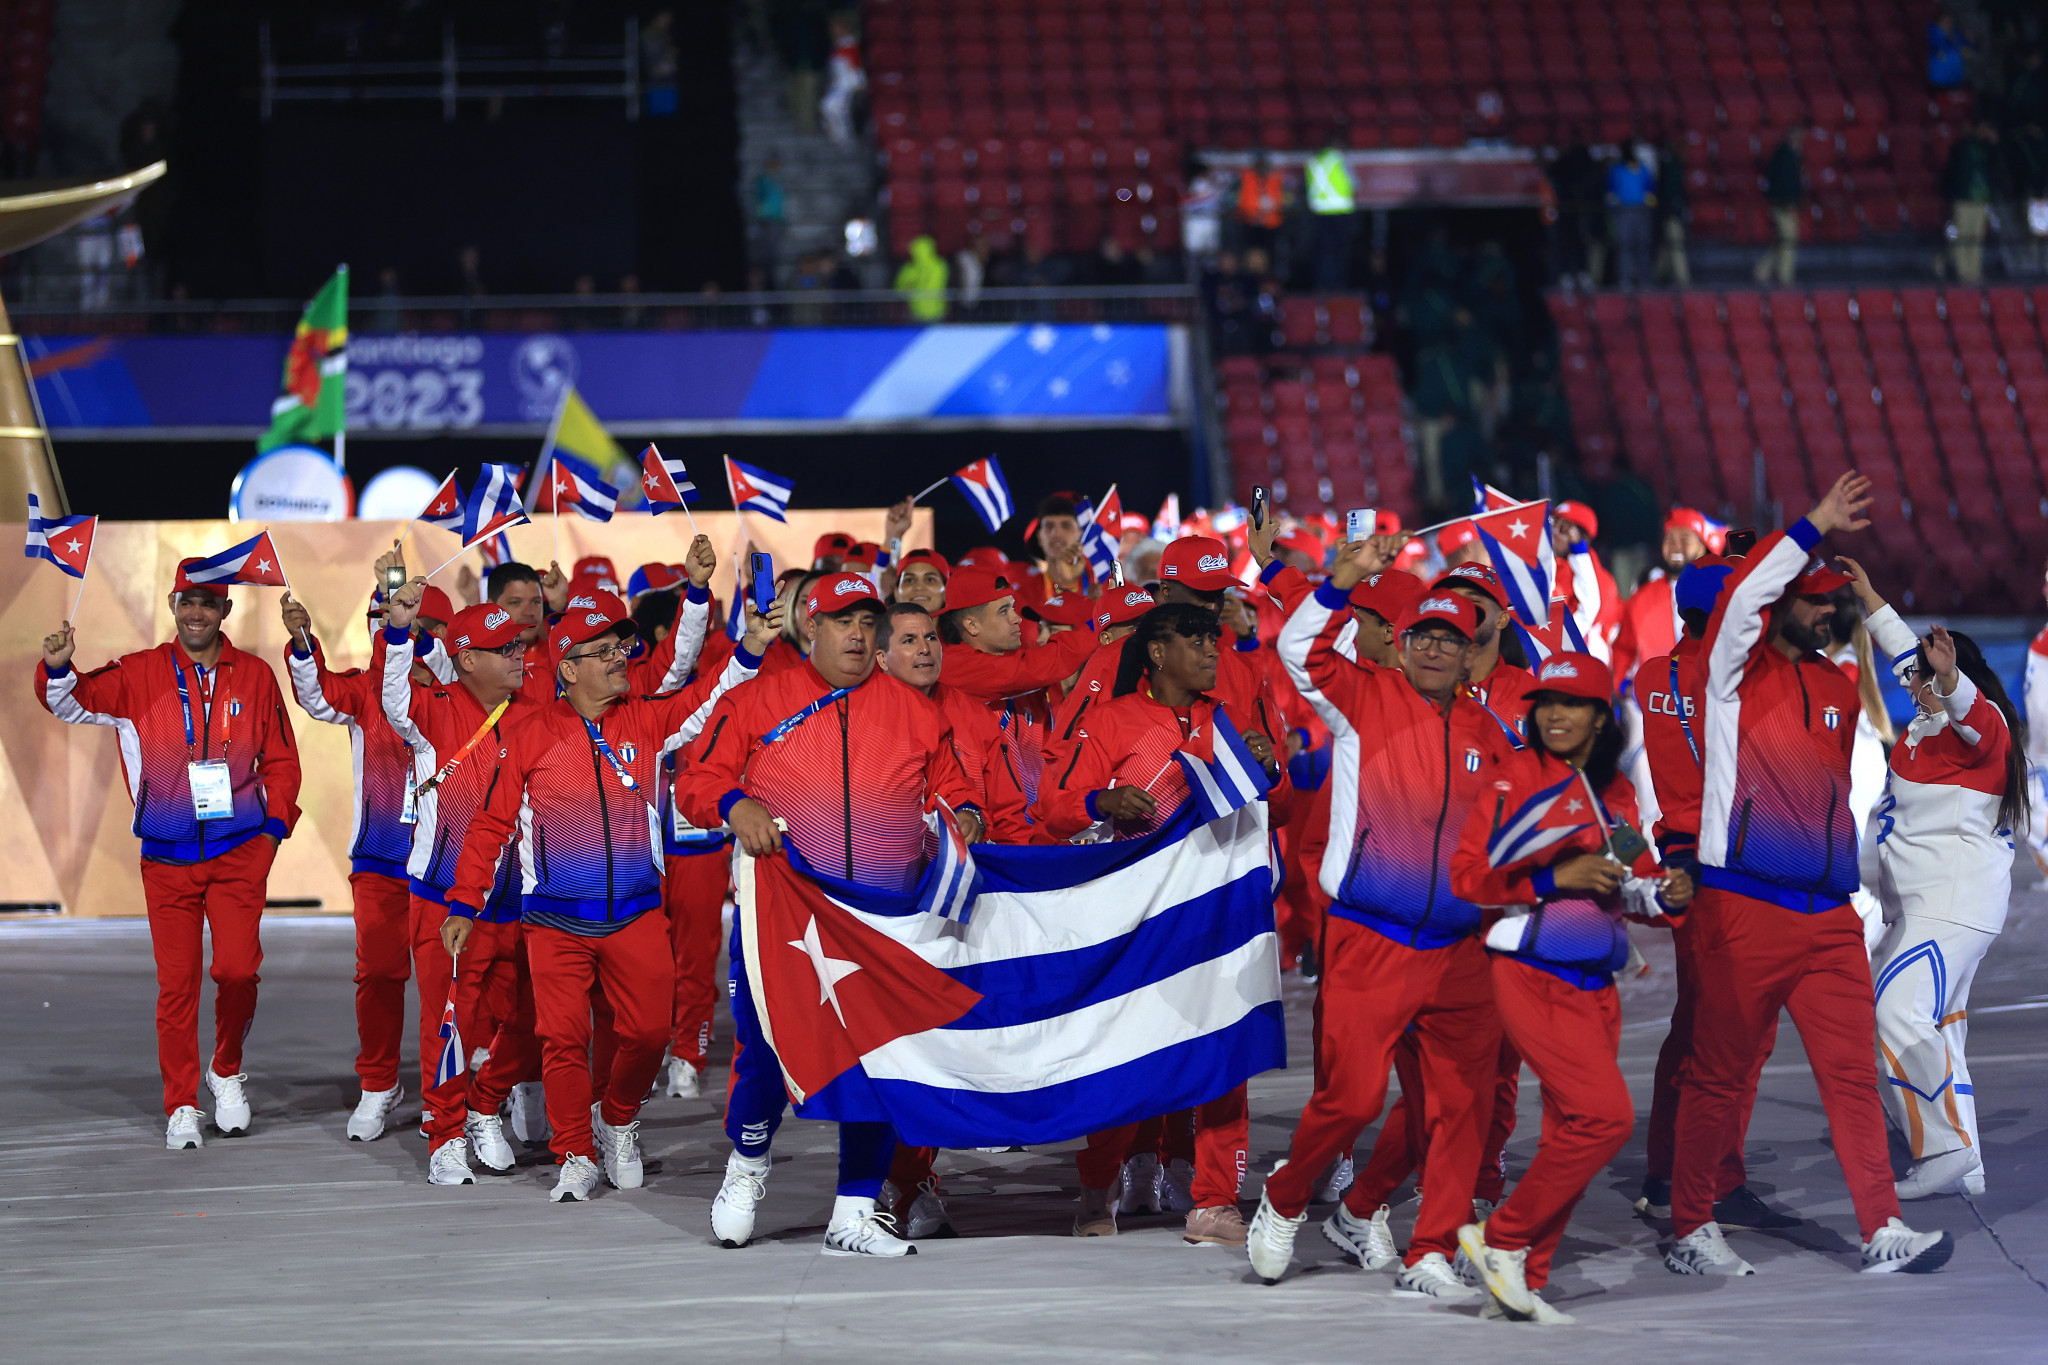 Cuba aspires to be in the top 20 of the medal table at Paris 2024